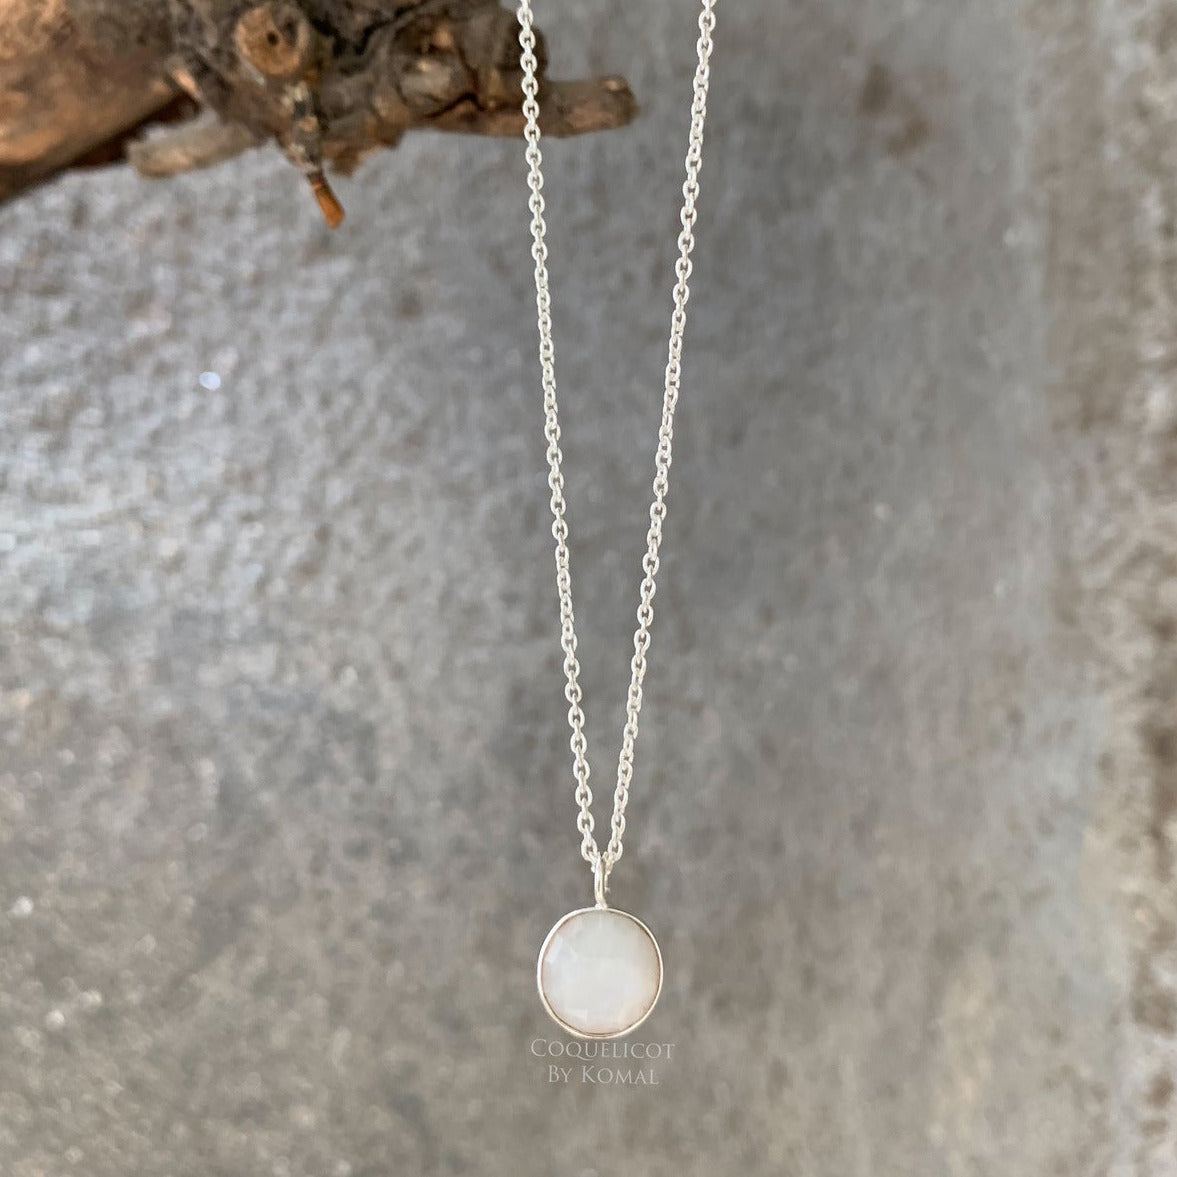 10mm white Rainbow Moonstone pendant placed in a 18 inches chain with fine polish. Handcrafted jewellery that is a unique spiritual gift.